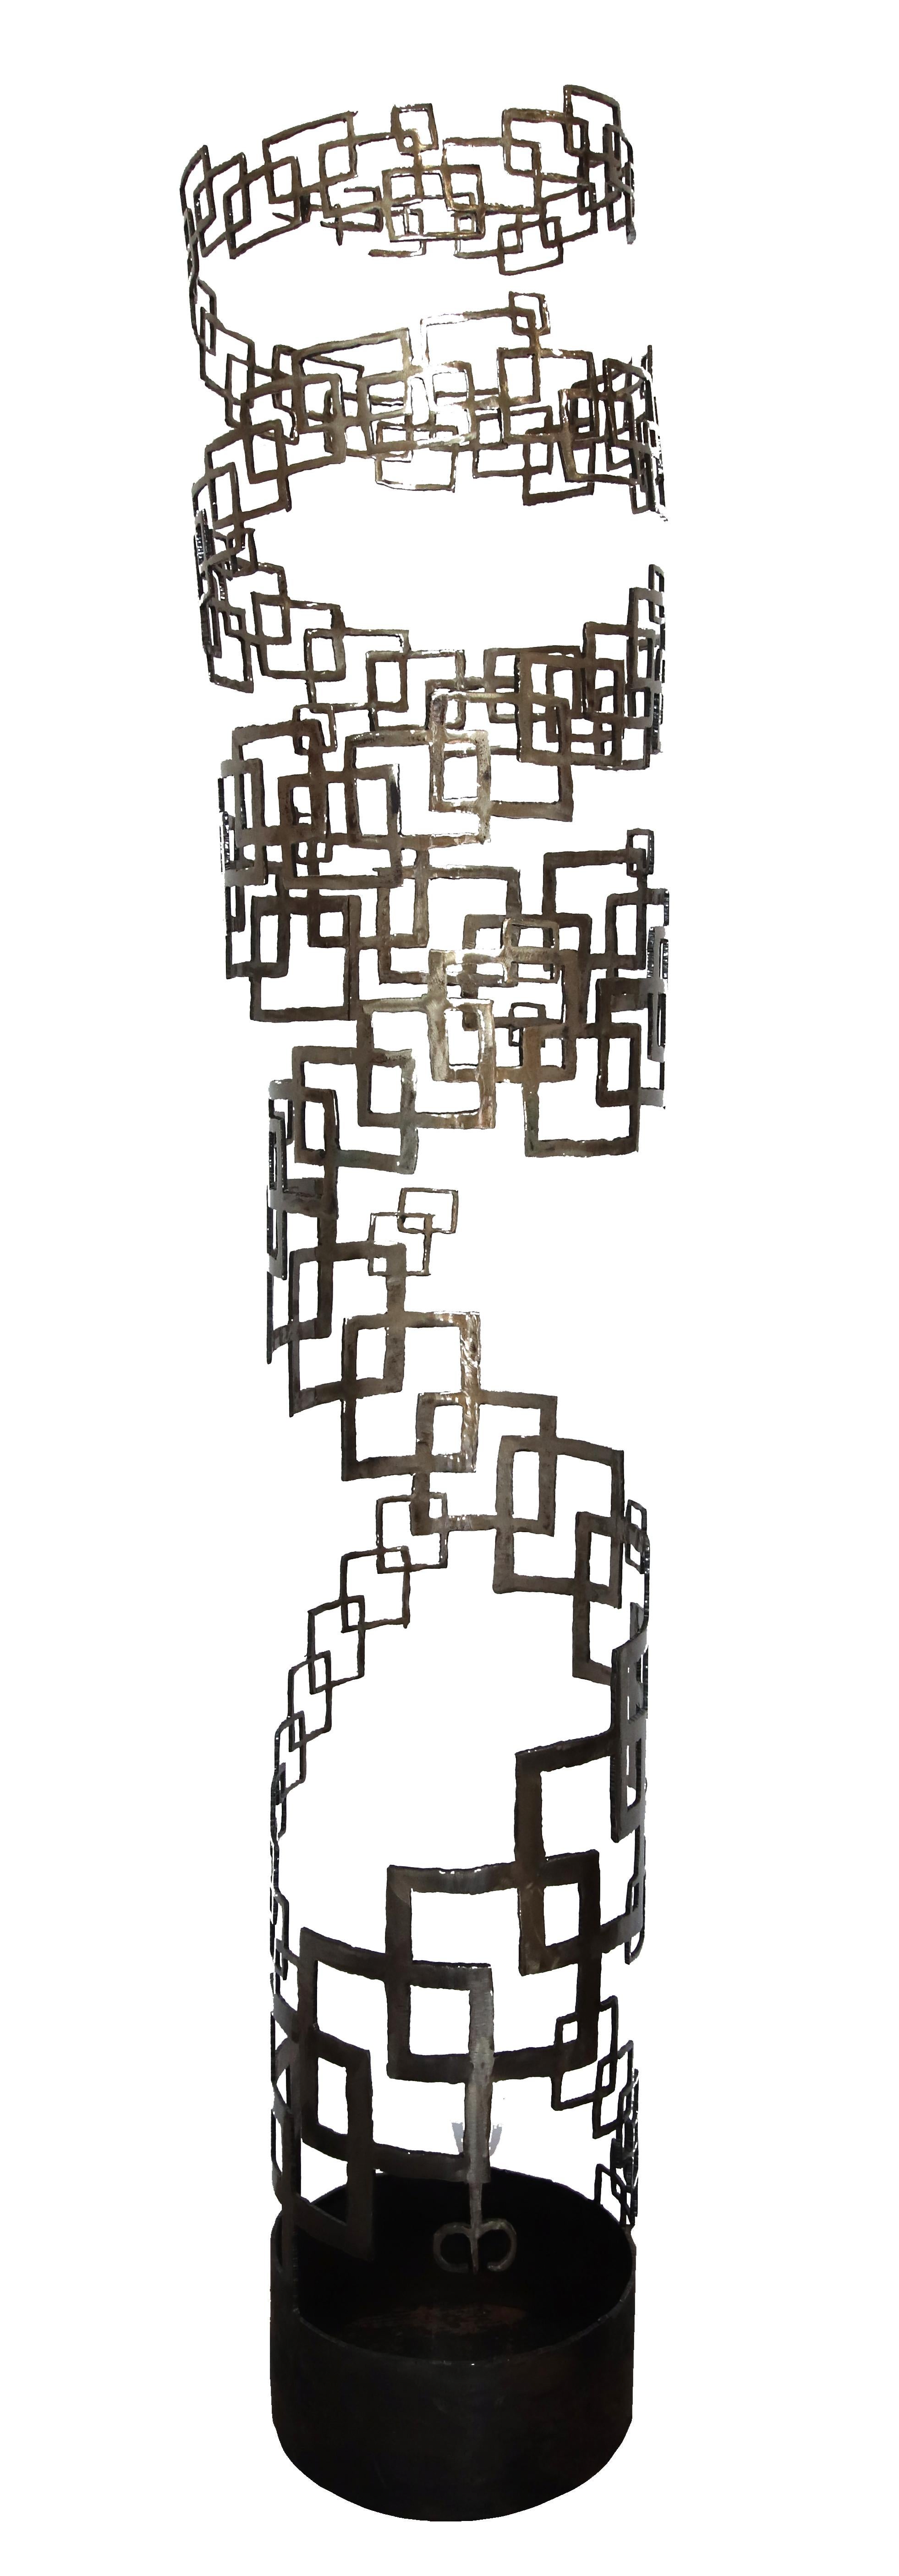 Square To The Second Power - Large Original Abstract Steel Sculpture